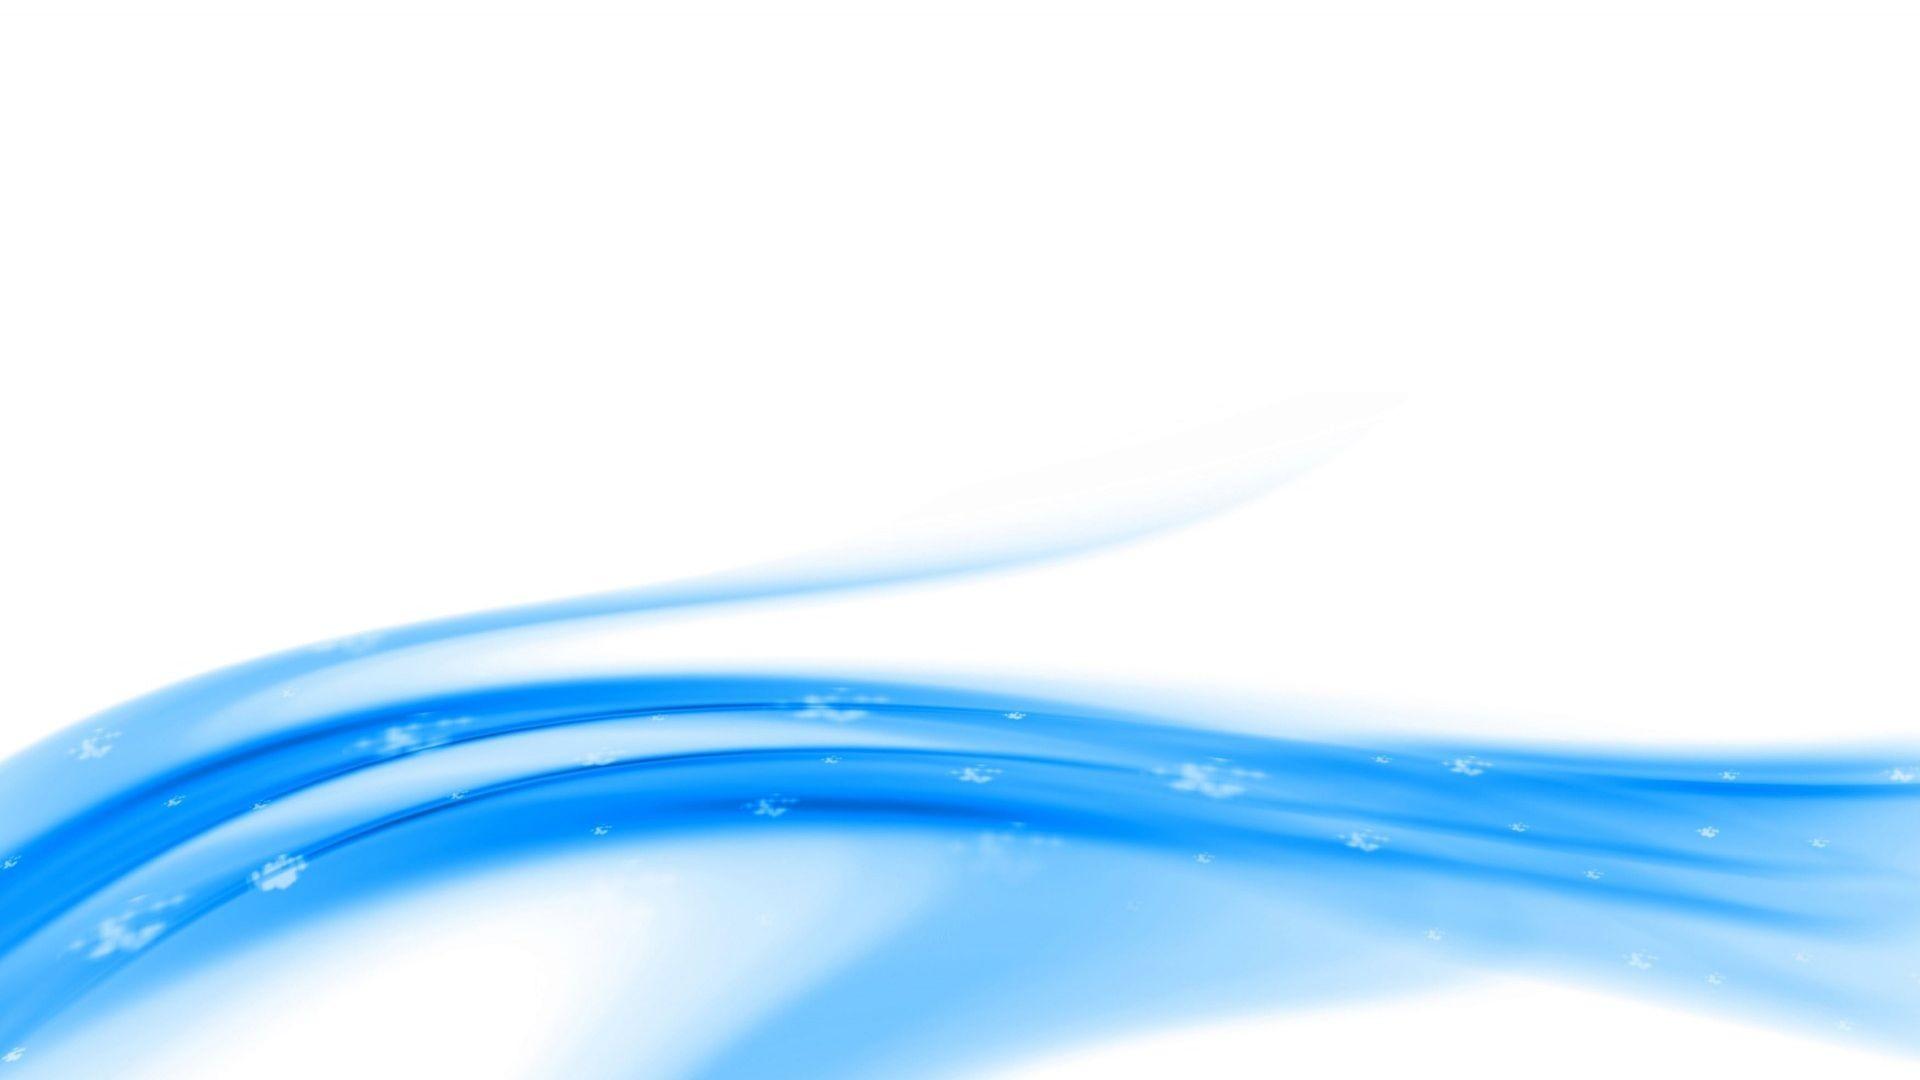 Blue waves abstract wallpaper | (134244)